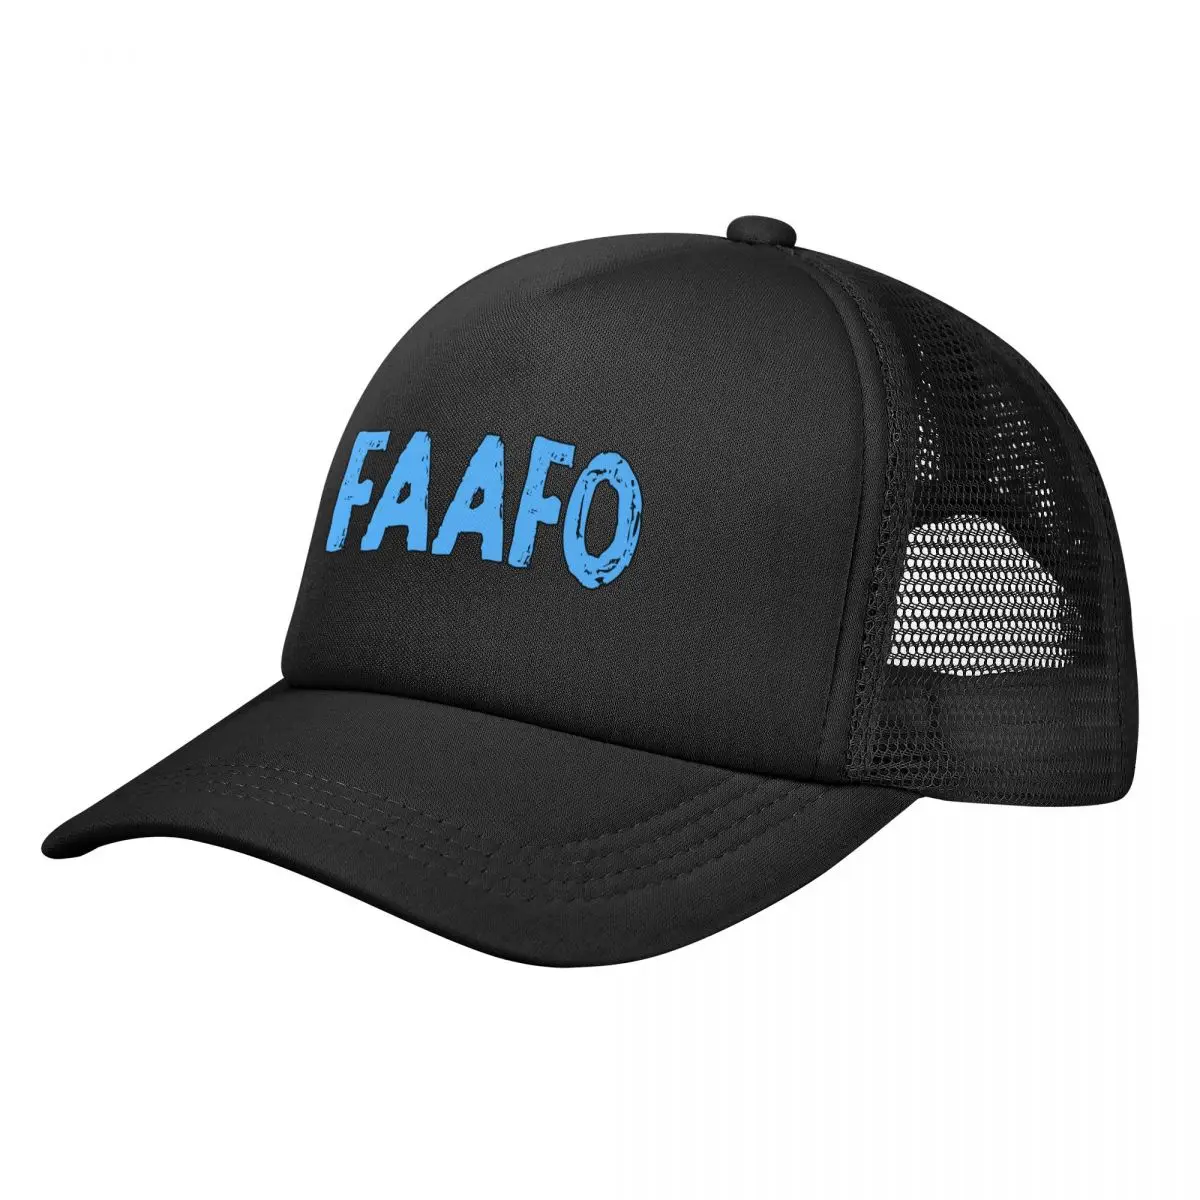 

FAAFO - F Around And Find Out Baseball Cap Vintage Bobble Hat Golf Men Women's